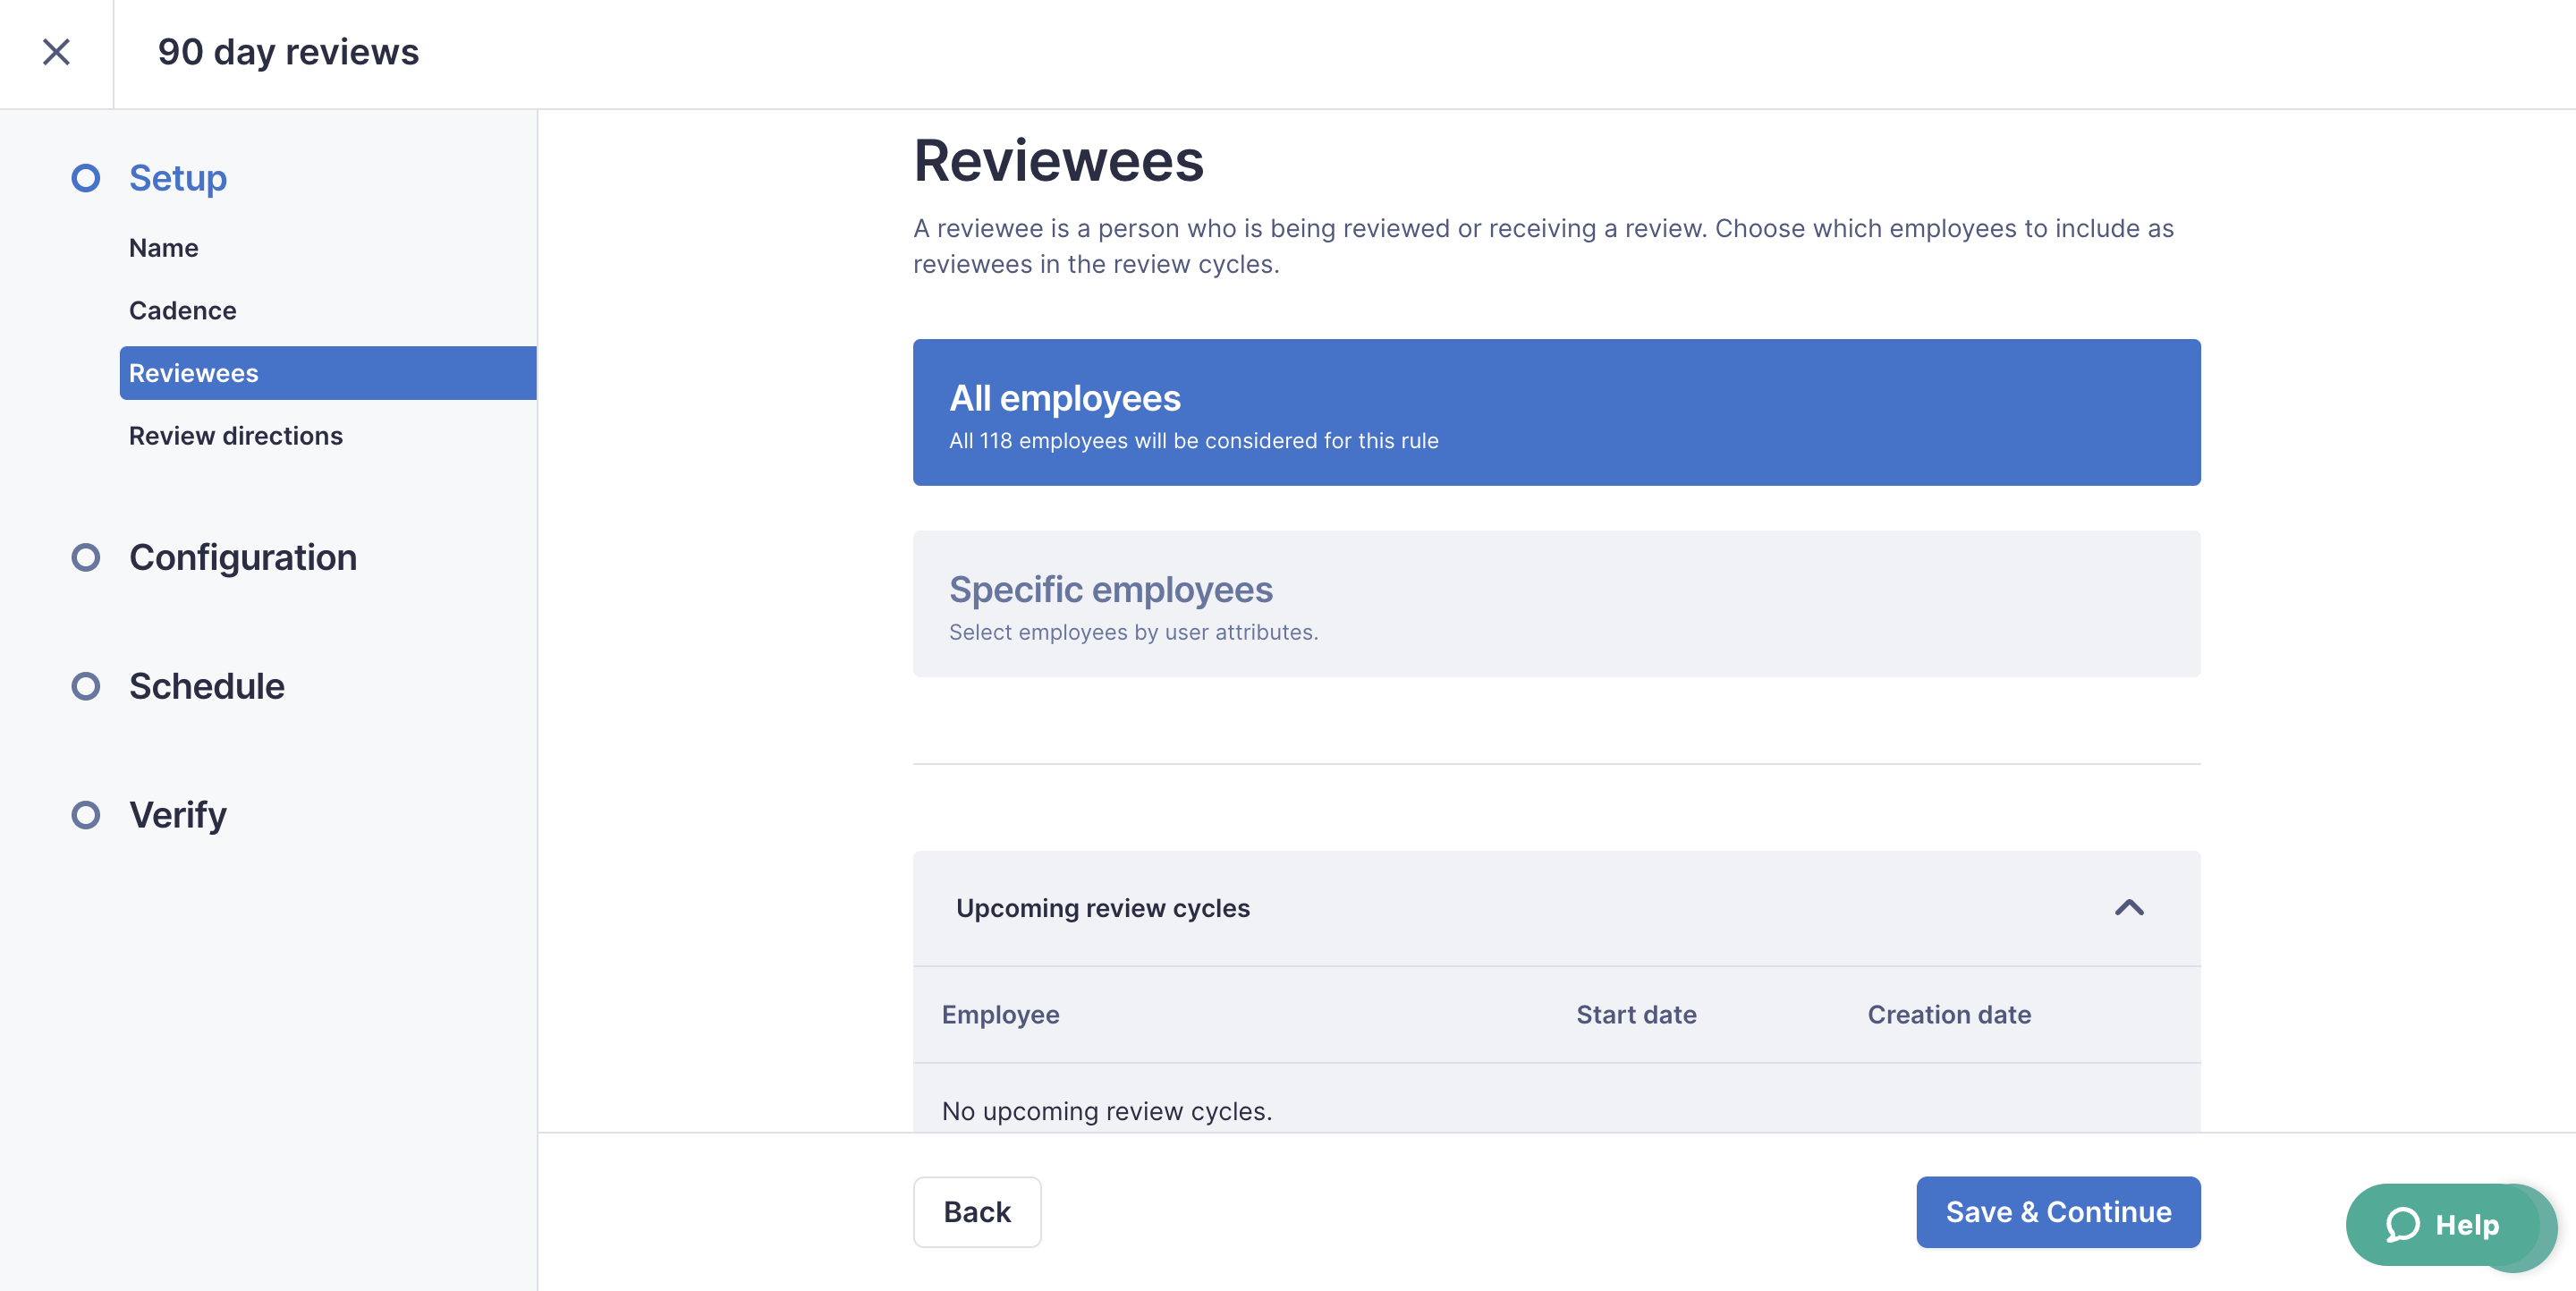 Image of the Automated Rules settings within the Revieweews page